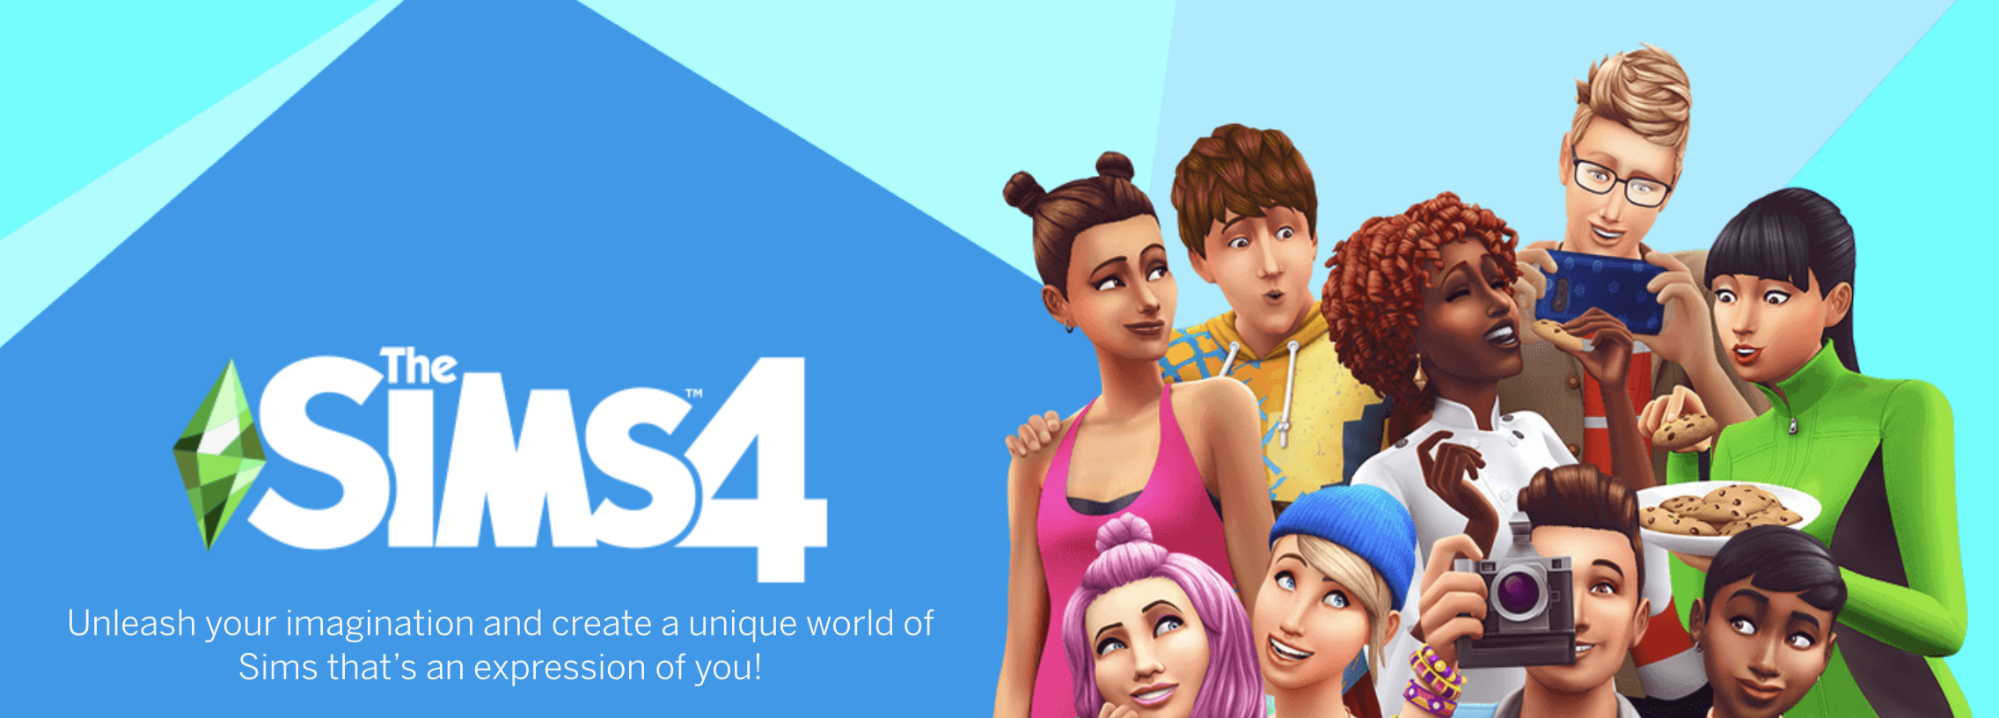 the sims 4 banner